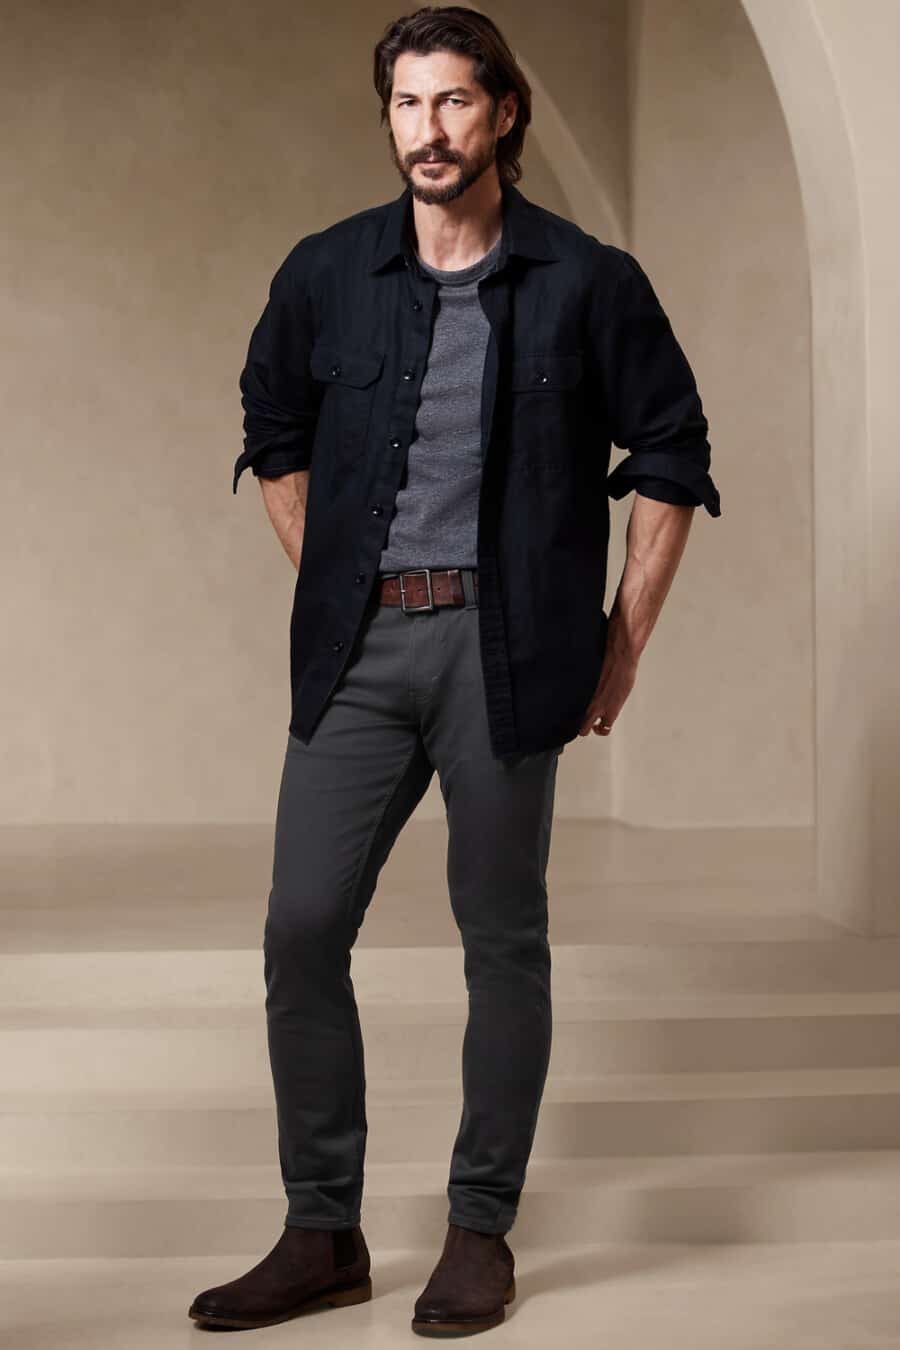 Men's charcoal chinos, dark grey T-shirt, black oversized shacket, brown leather belt and brown suede Chelsea boots outfit